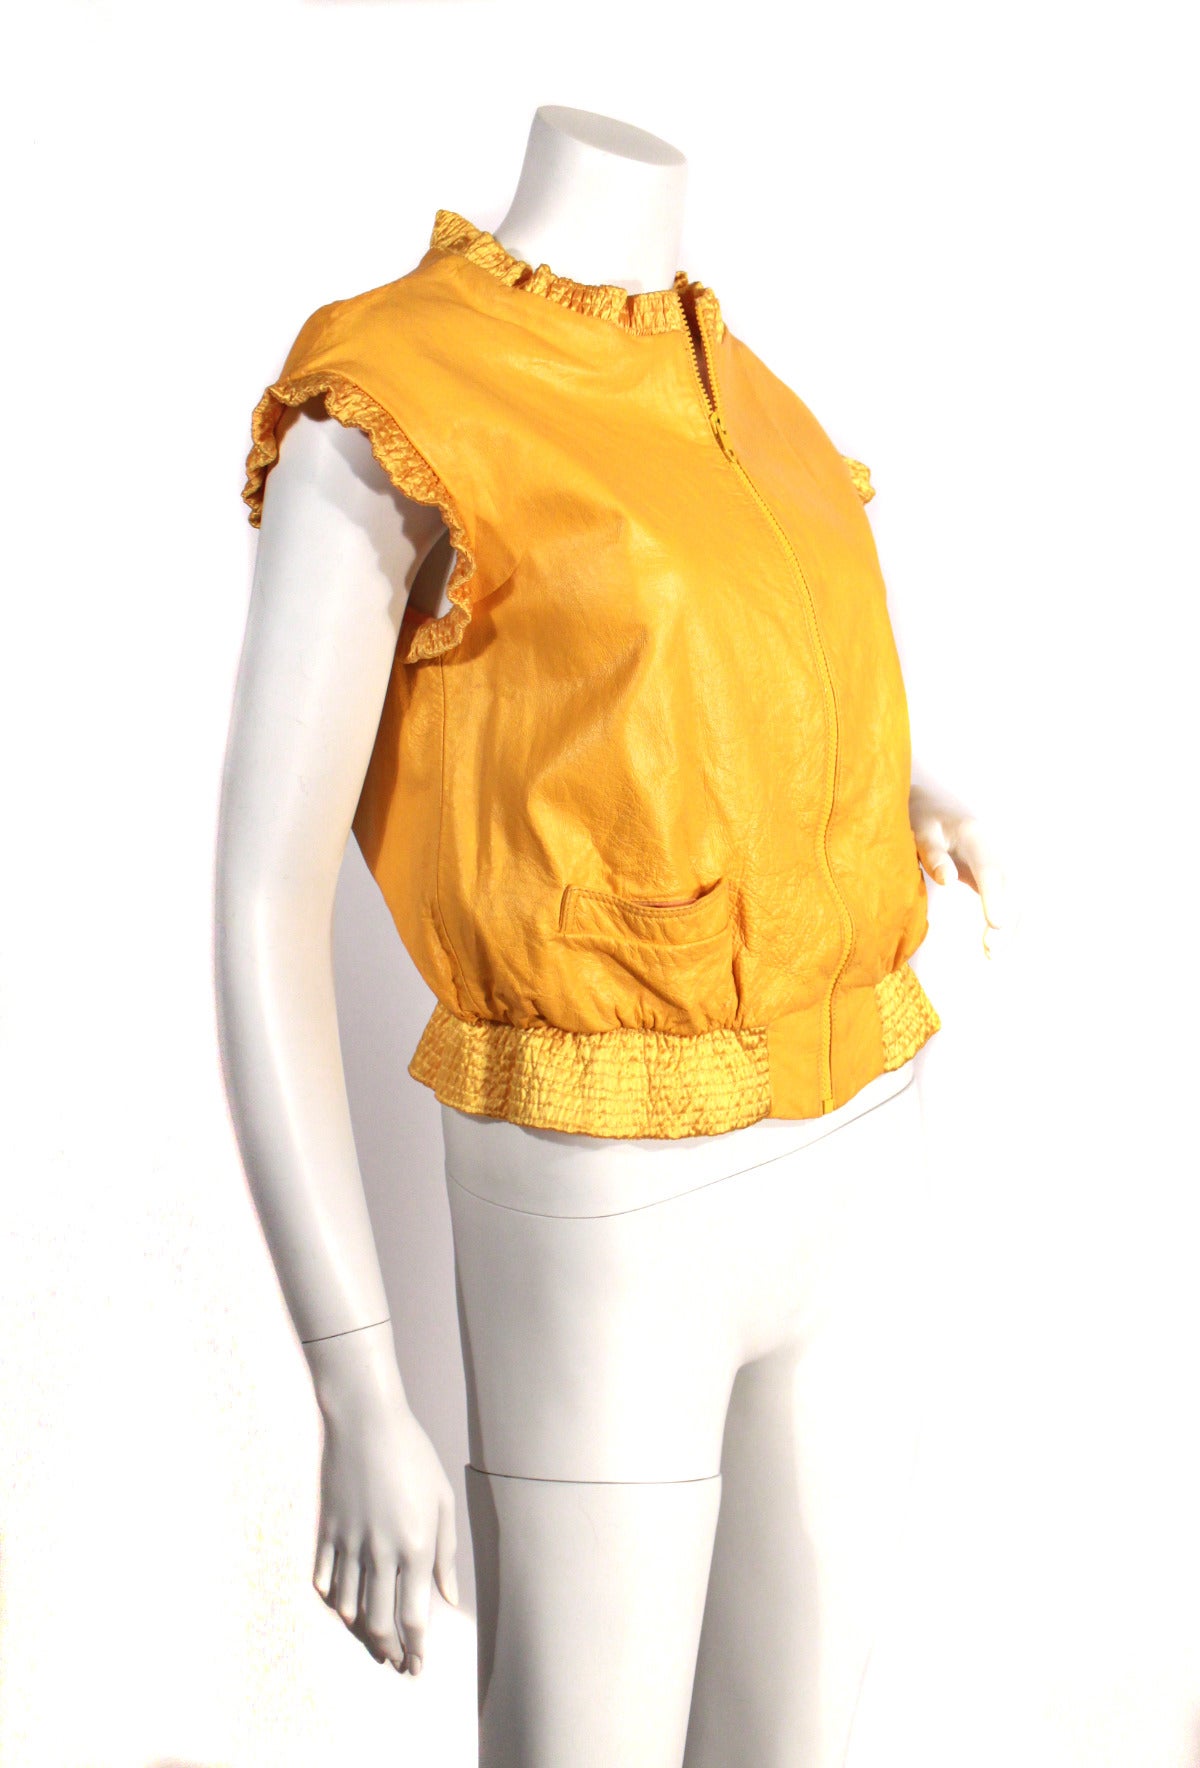 Rare Koos Van Den Akker yellow cap sleeve leather Vest. Two front pockets, full zipper, fully lined. Excellent Condition.

Length 18 in.
Shoulder to Shoulder 20 in.